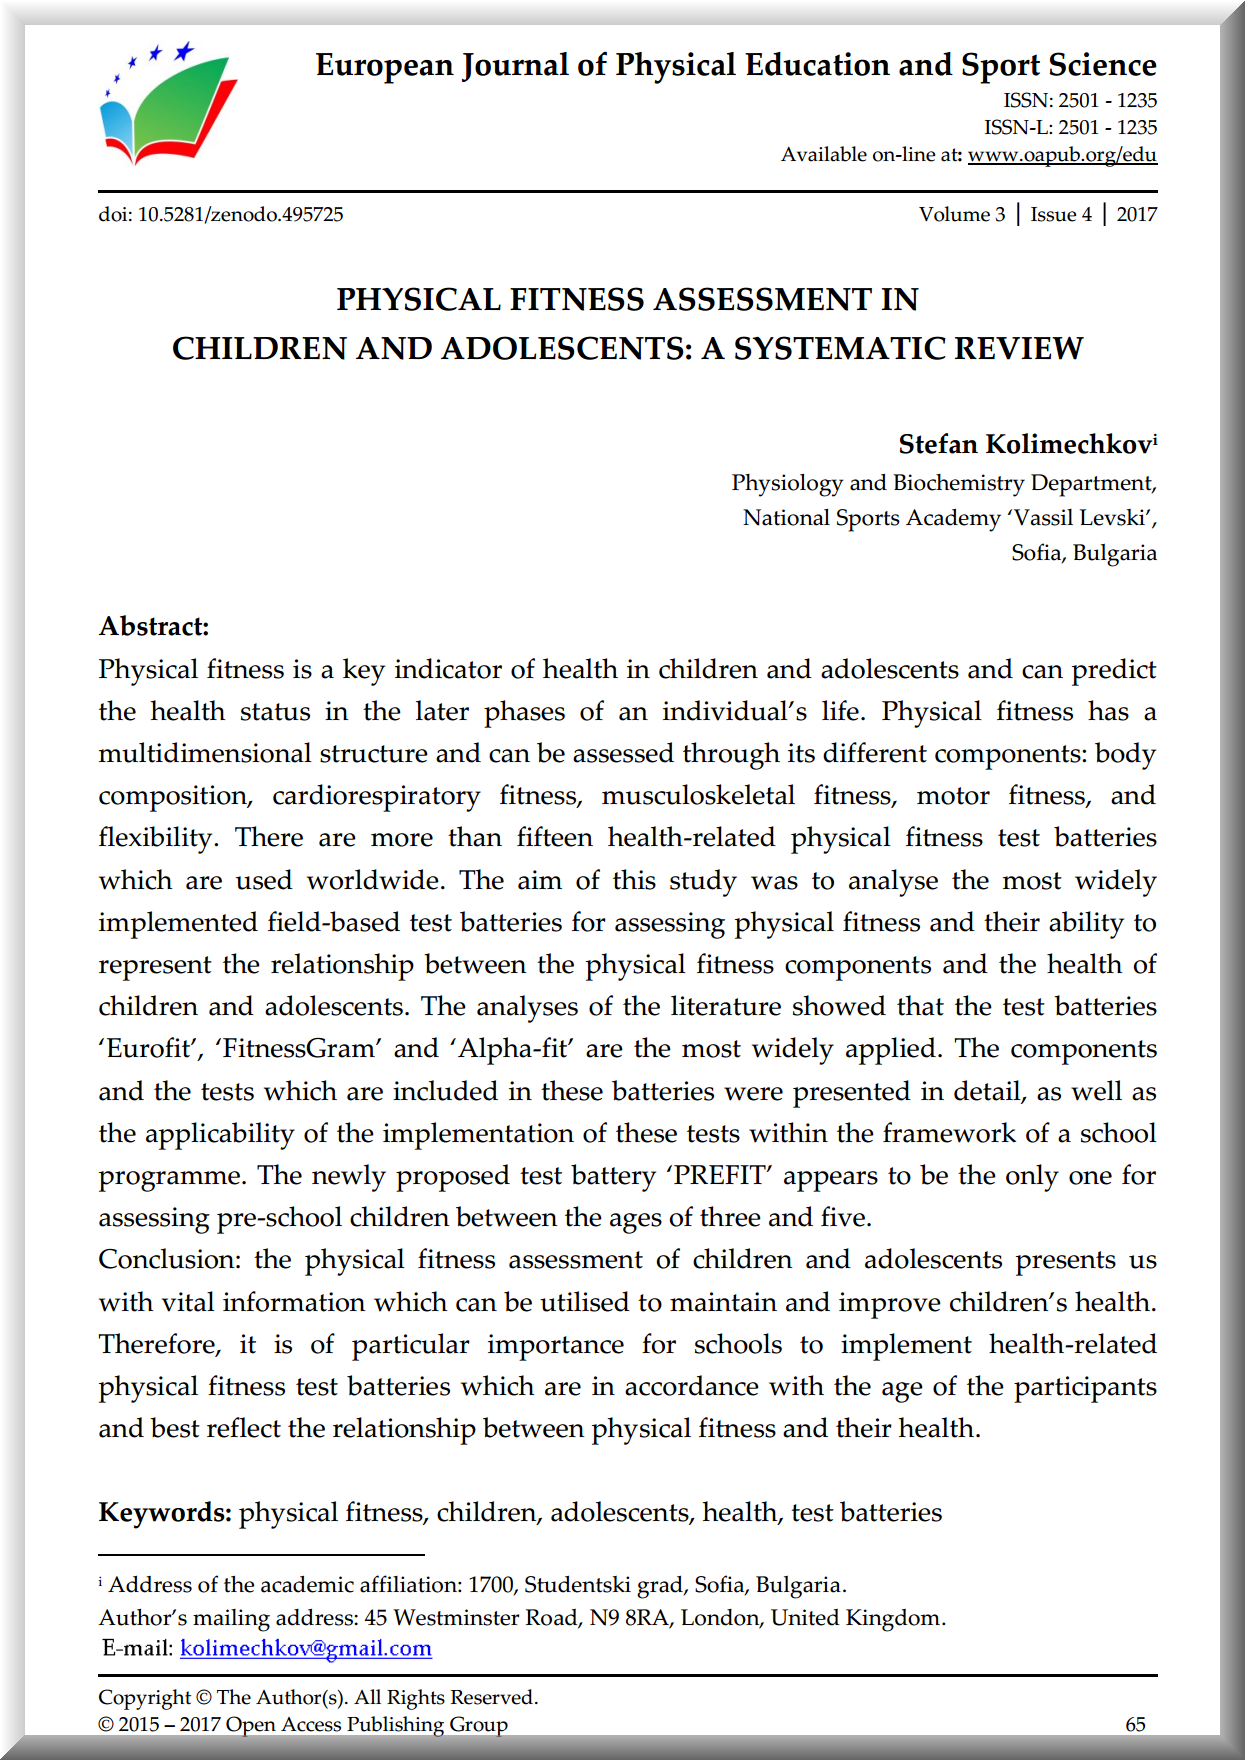 Physical Fitness Assessment in Children and Adolescents: A Systematic Review (2017)